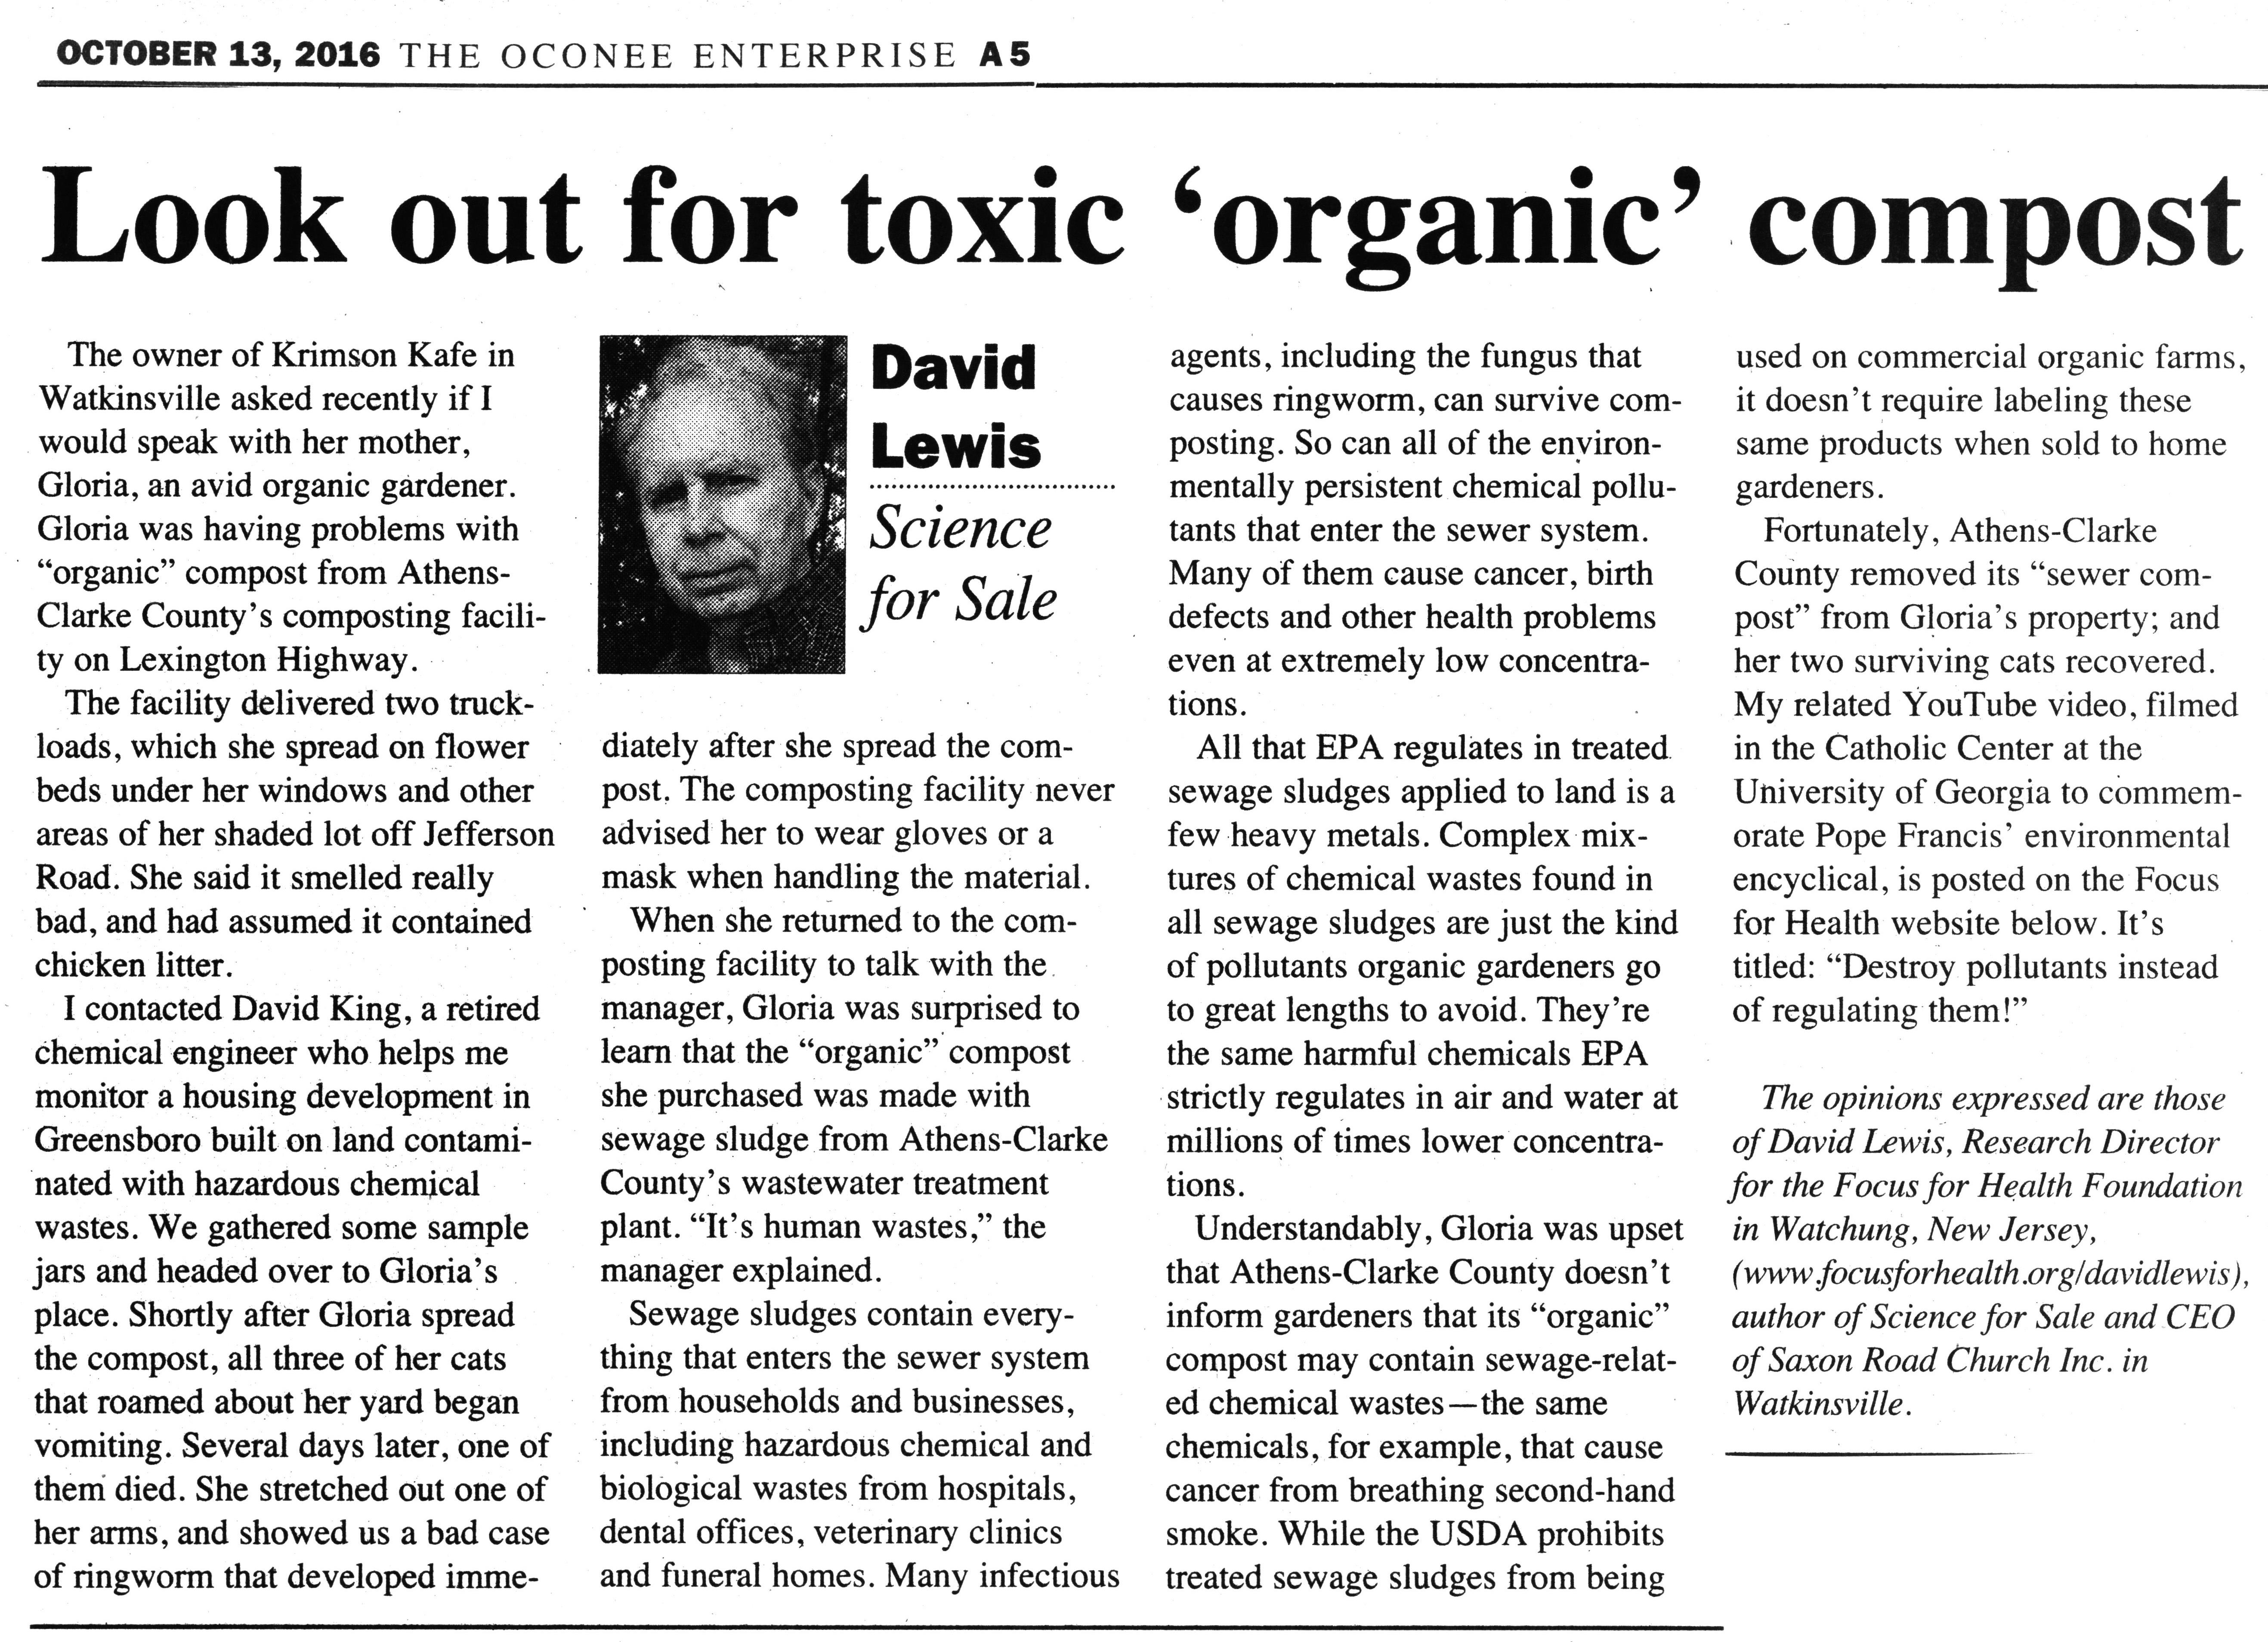 10-13-16-look-out-for-toxic-organic-compost